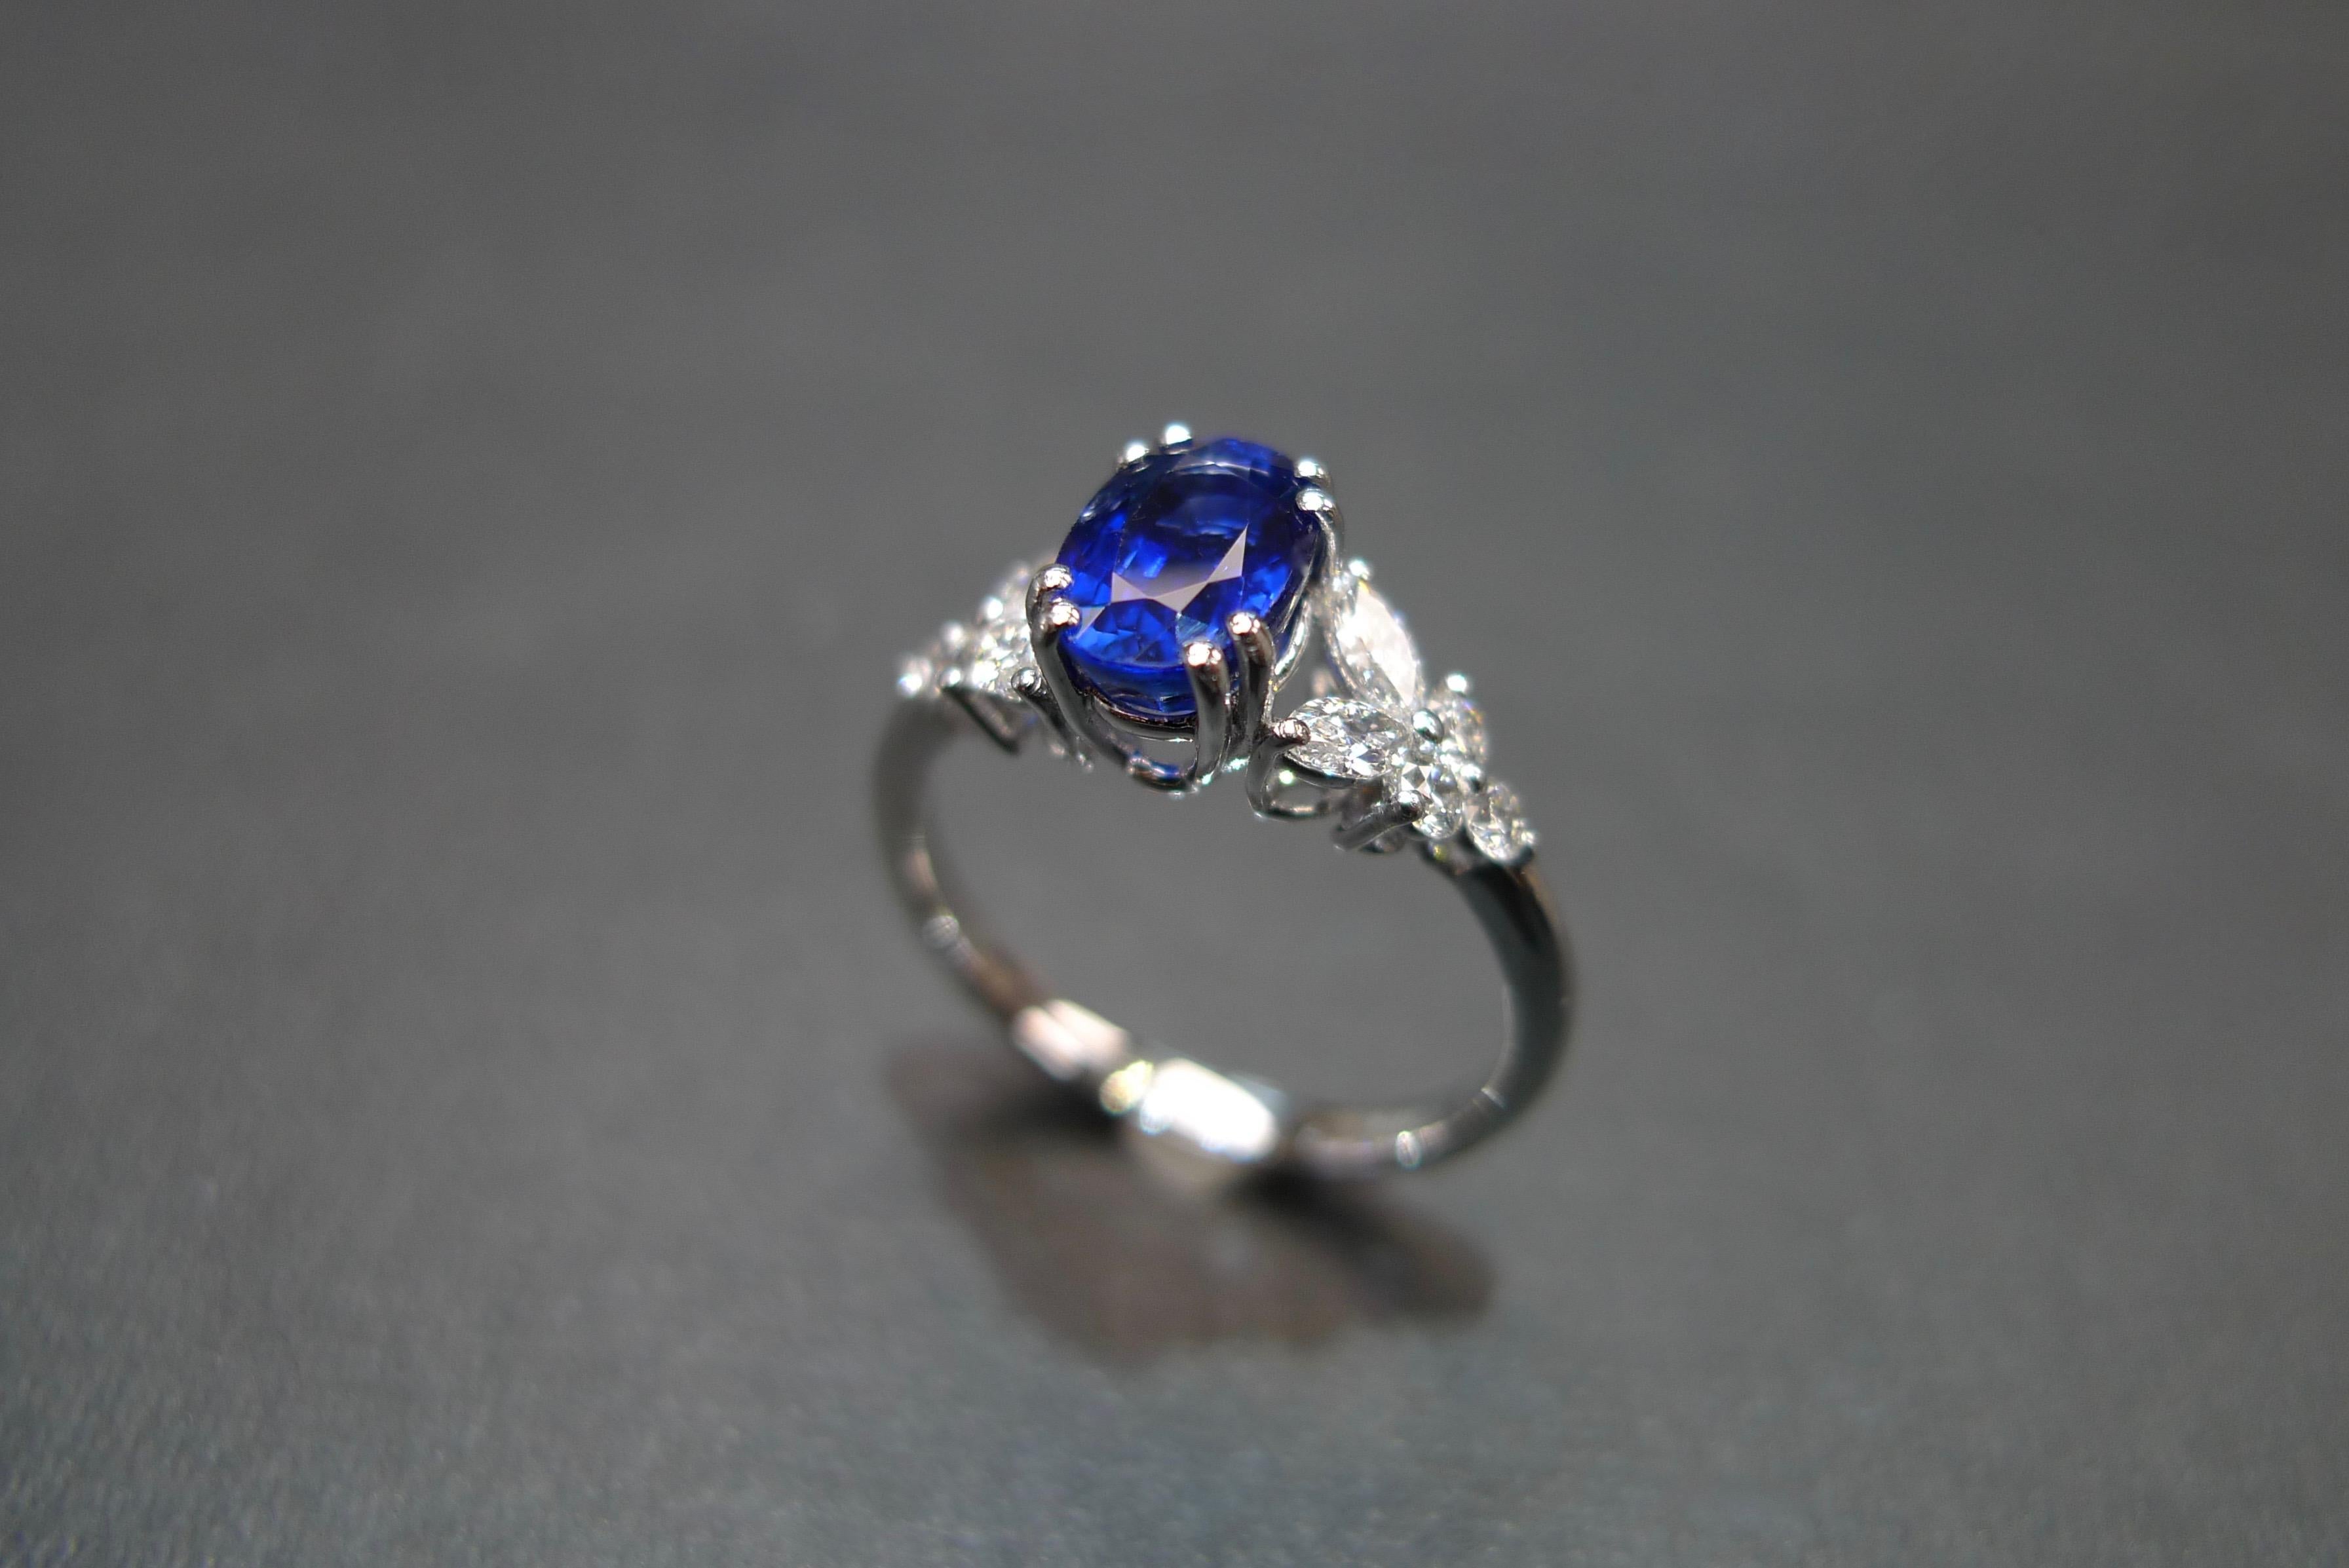 For Sale:  Blue Sapphire Engagement Ring with Marquise Cut Diamond in 18K White Gold 5